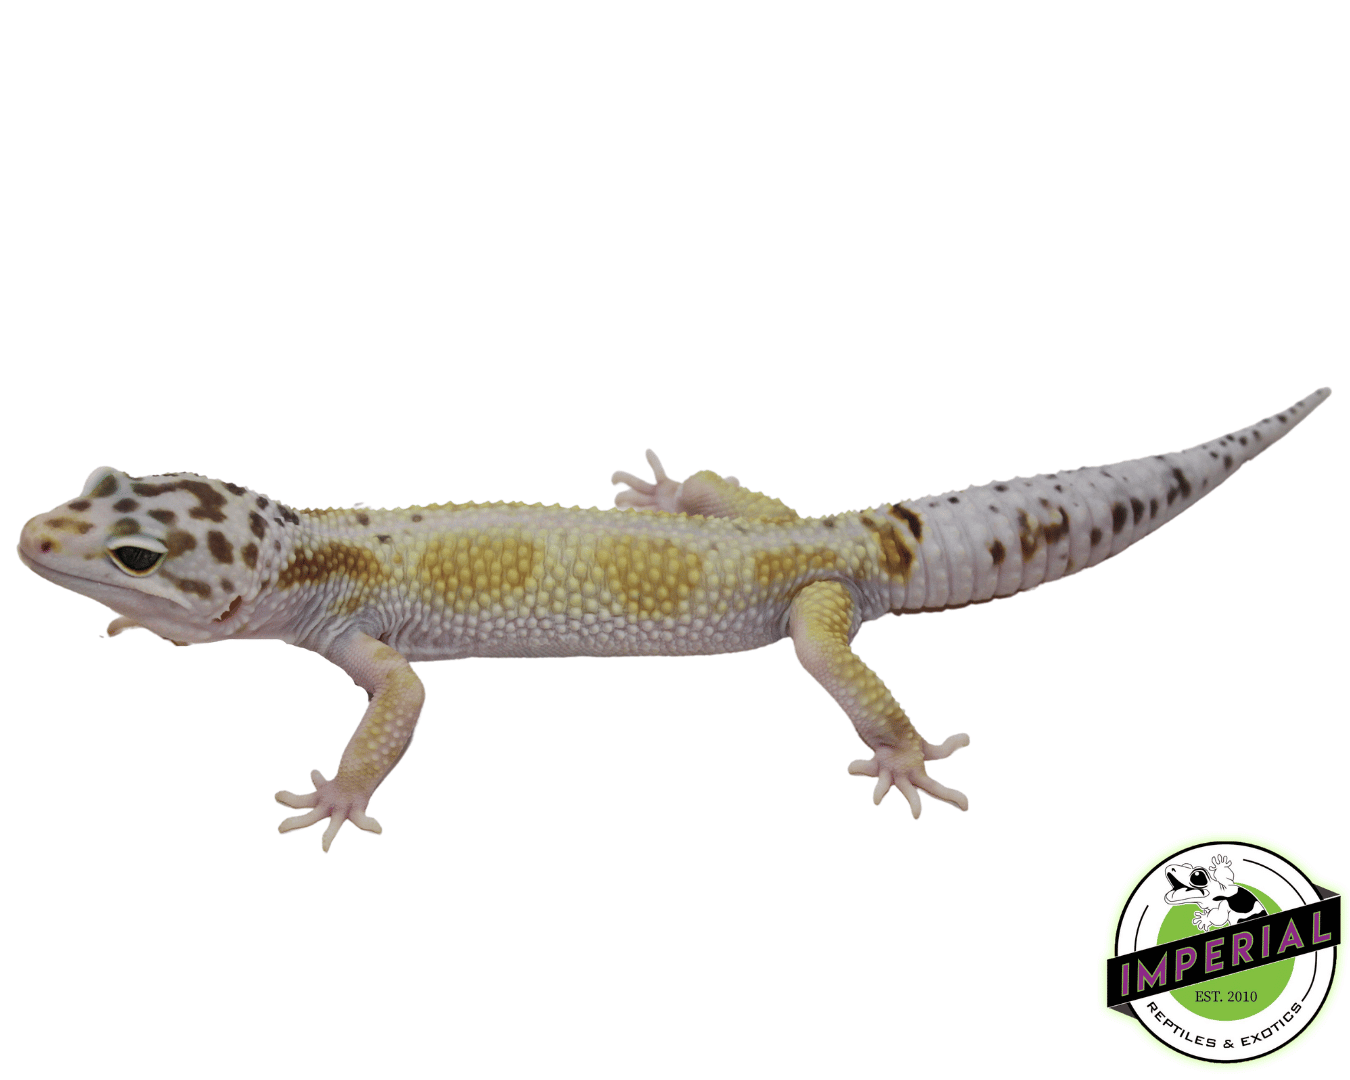 White & Yellow Leopard Gecko Adult